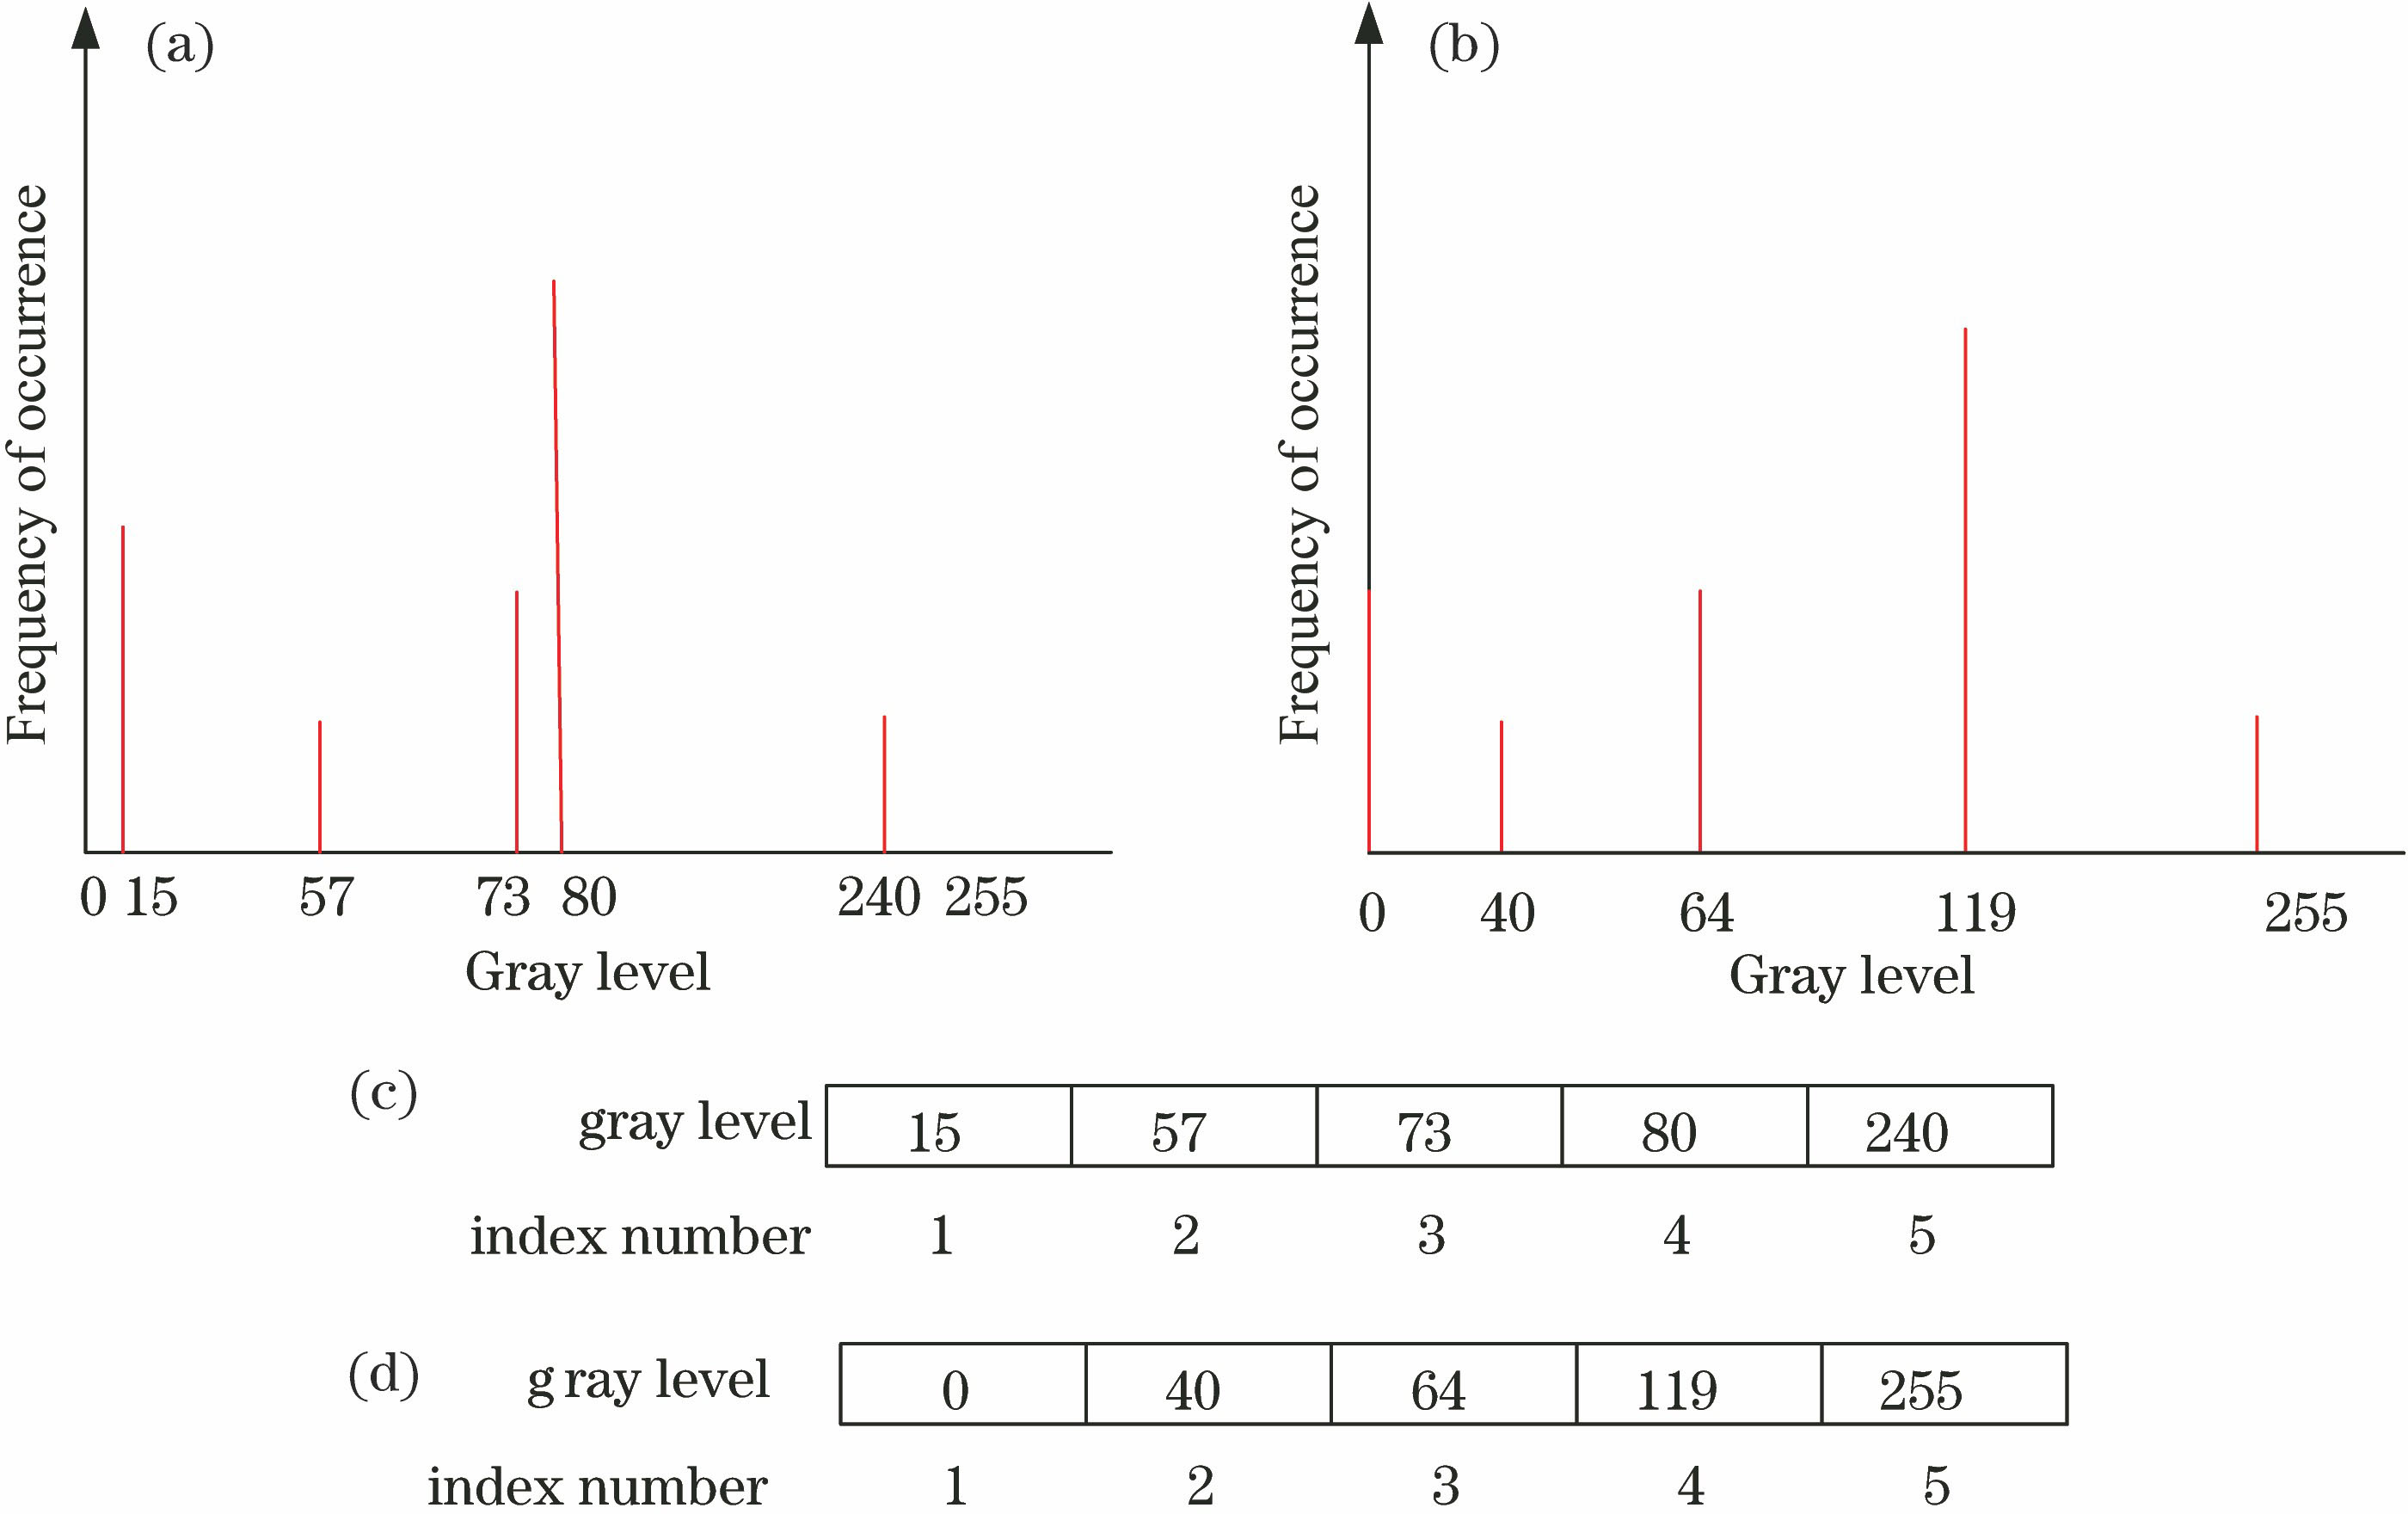 Schematics of chromosome structure before and after mapping. (a) Distribution of gray value of original image; (b) gray value distribution of remapped image; (c) original chromosome structure; (d) remapped chromosome structure